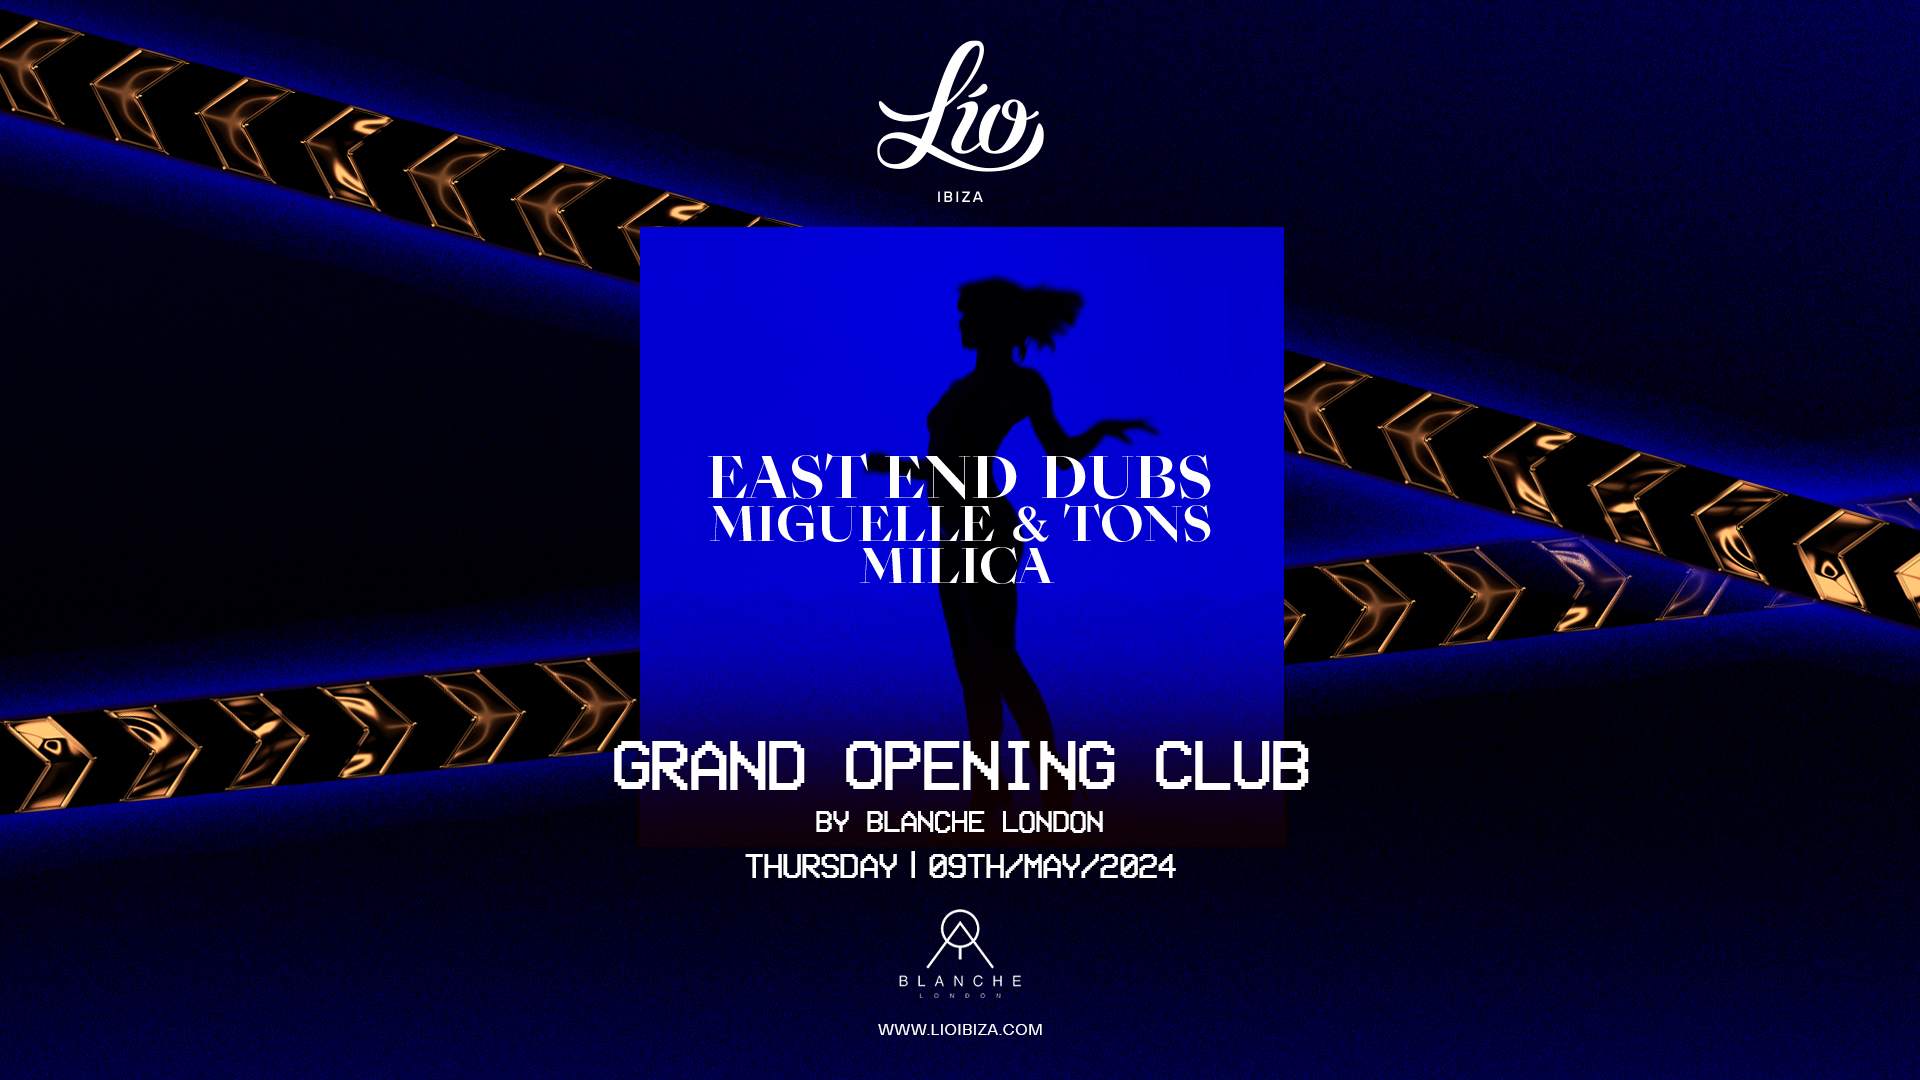 Lío Ibiza Grand Opening Club by Blanche London - フライヤー表